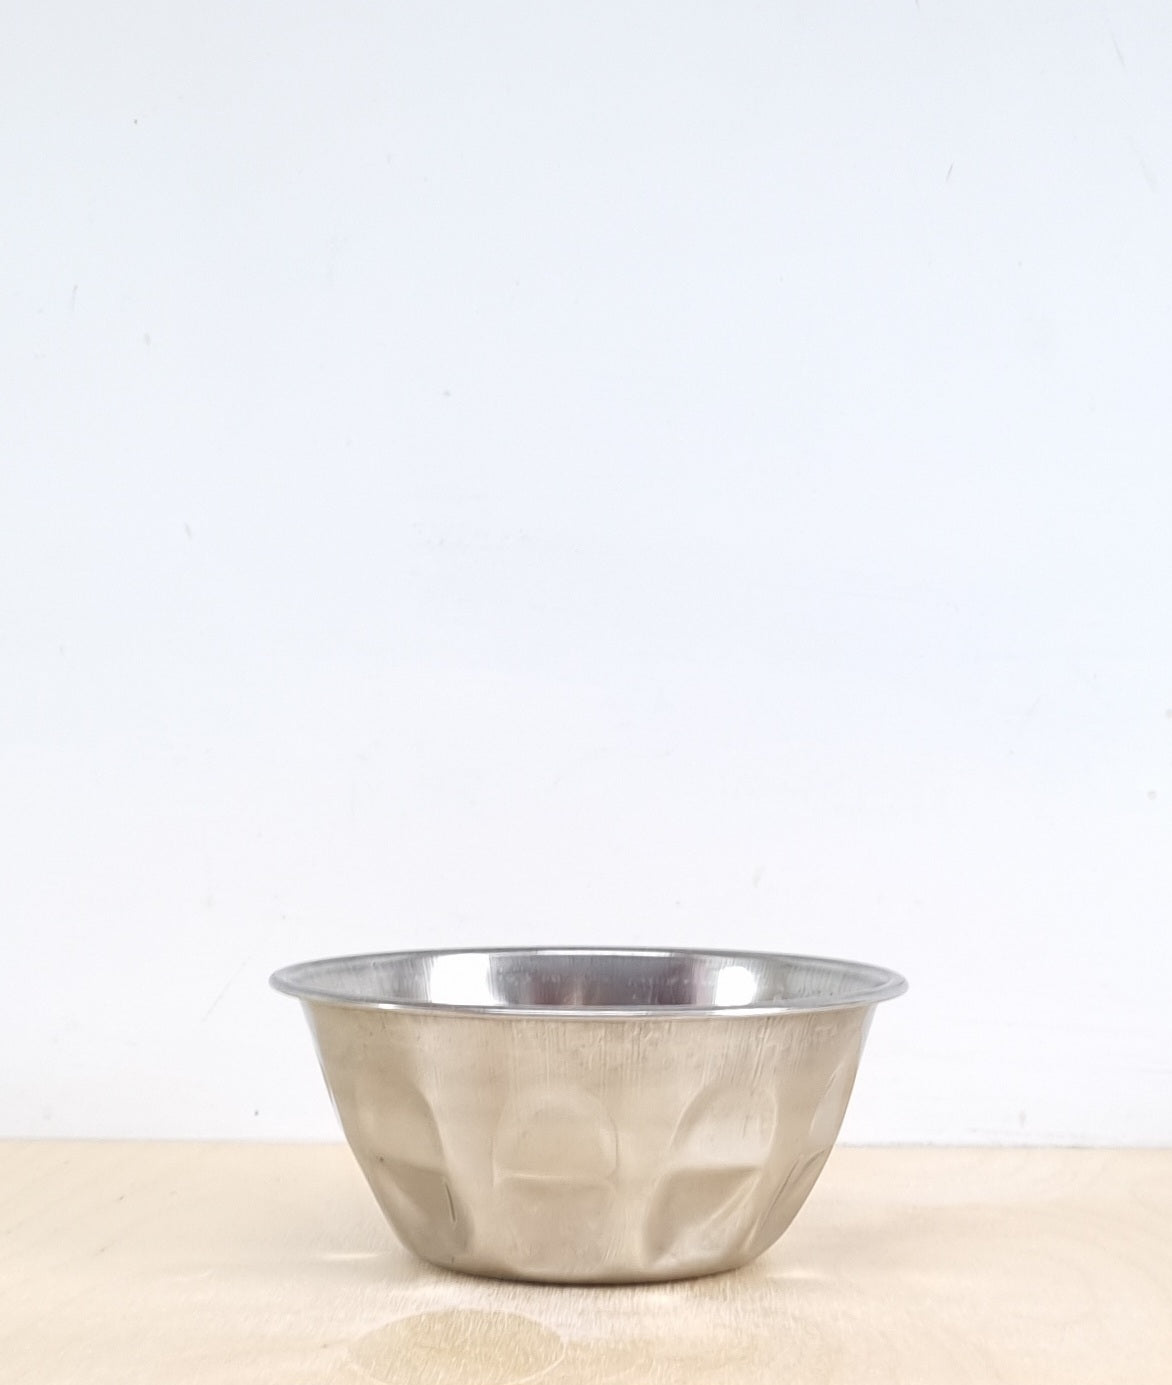 Small stainless steel bowl